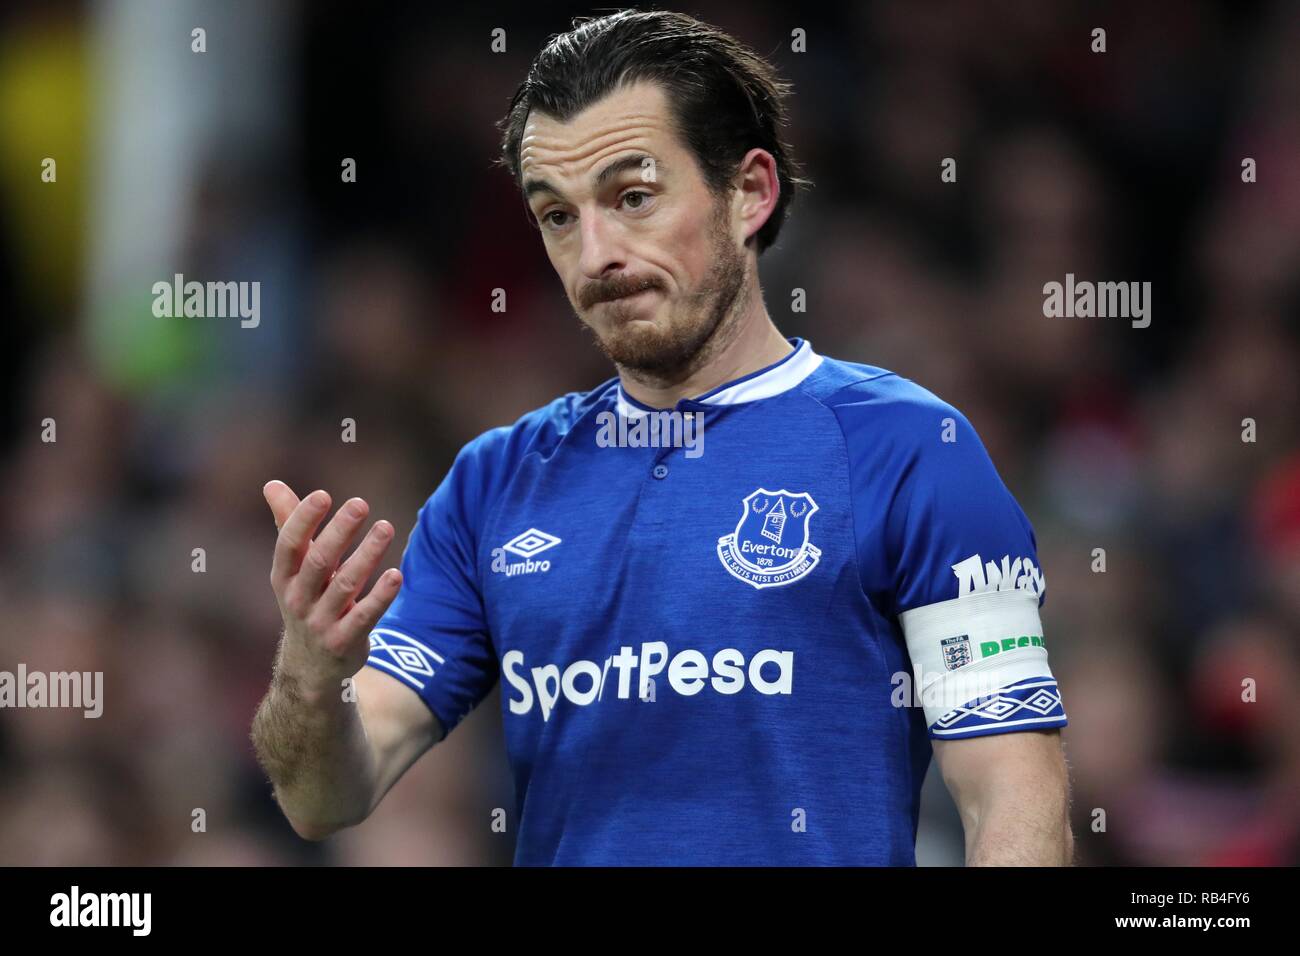 LEIGHTON BAINES, Everton FC, FC Everton V LINCOLN CITY, unis en FA CUP, 2019 Banque D'Images